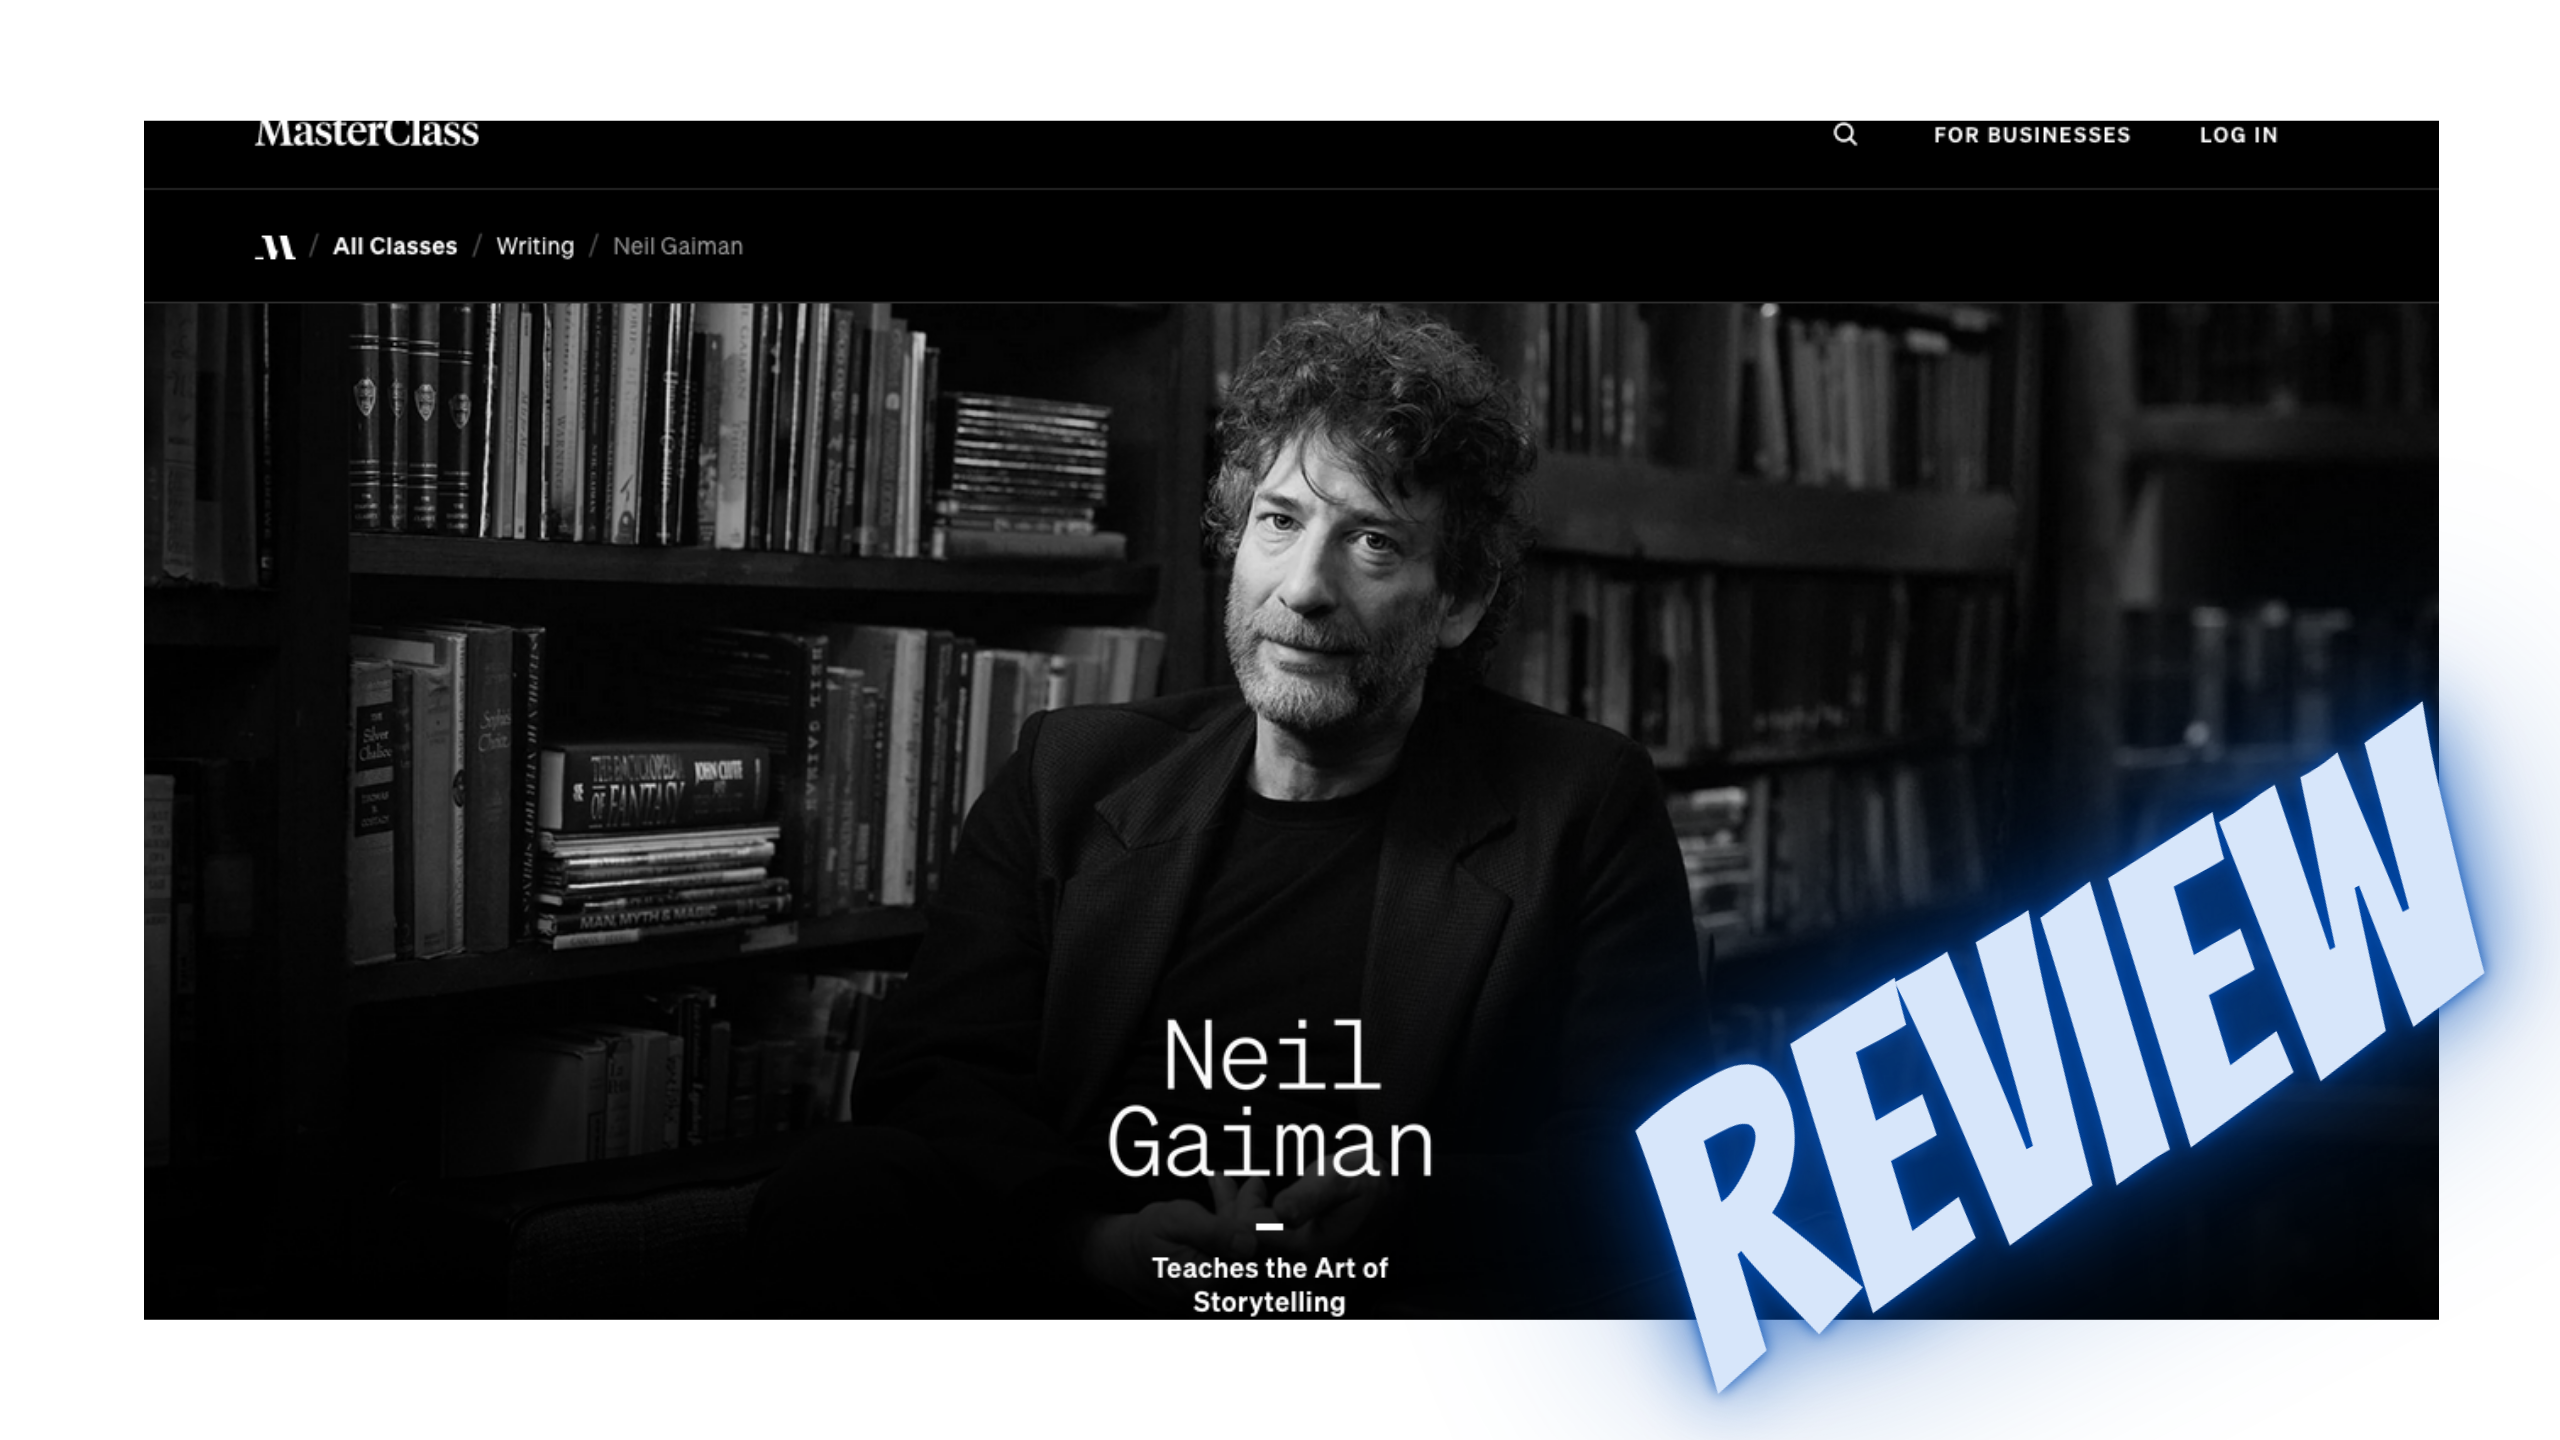 Neil Gaiman Masterclass Review 2022: The Writing Course For Short Story Fiction Writers (And Others!)